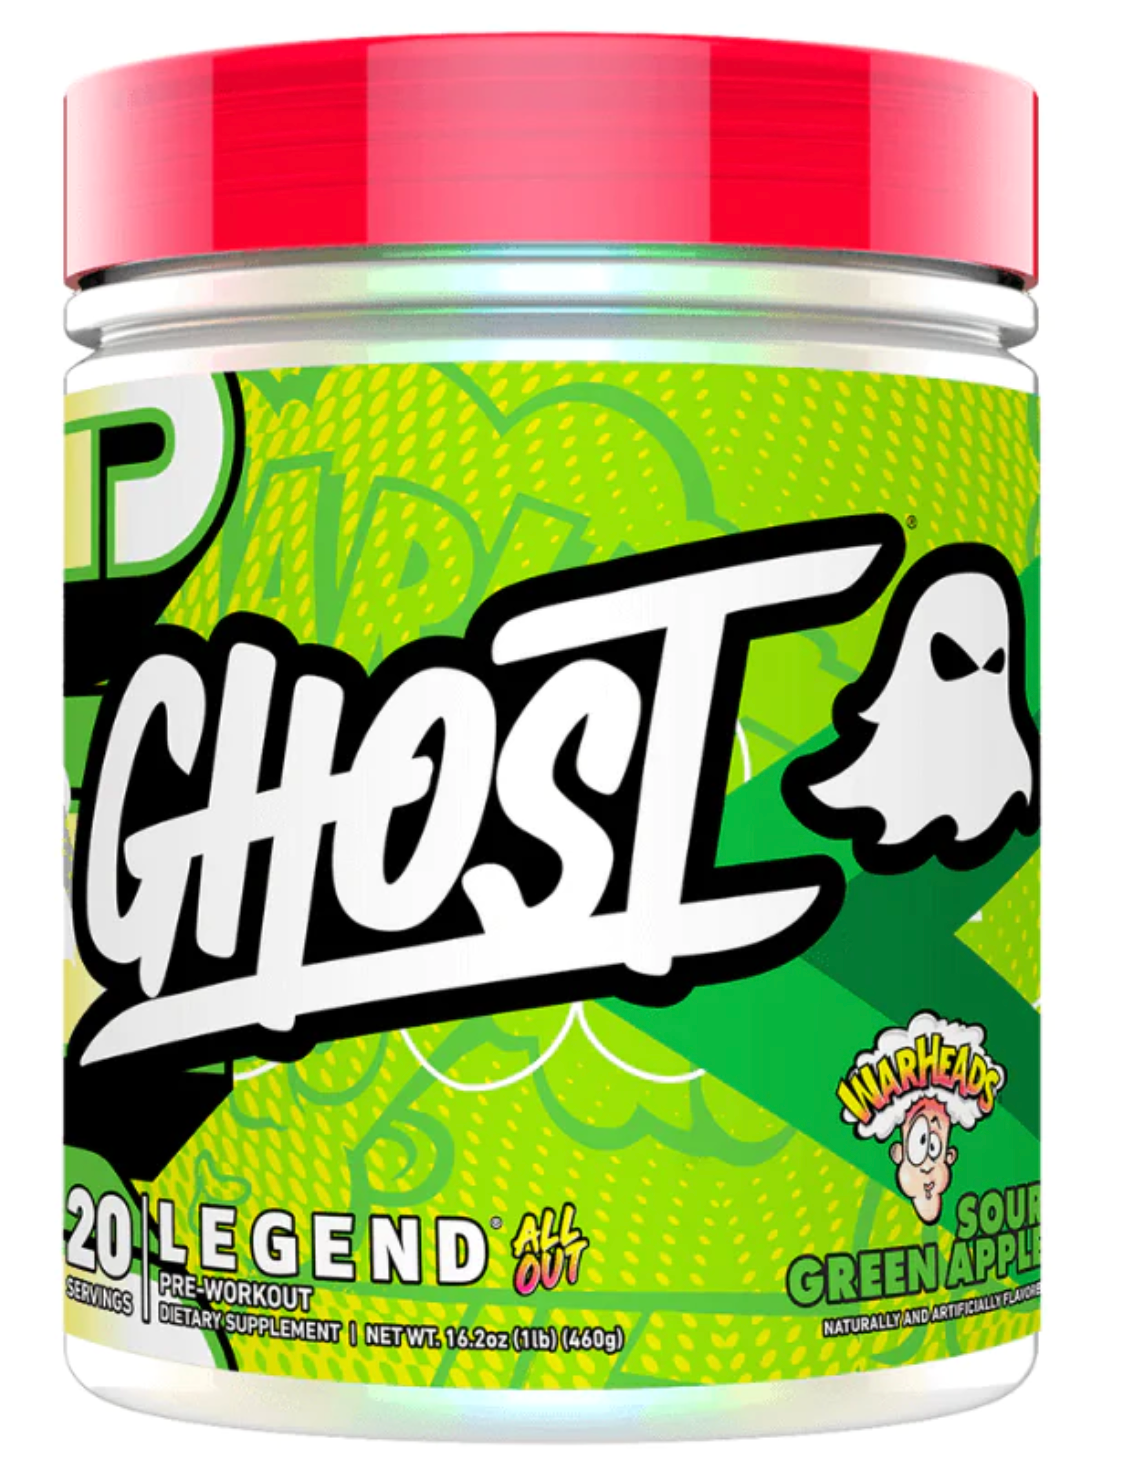 Ghost Legend ALL OUT Pre Workout